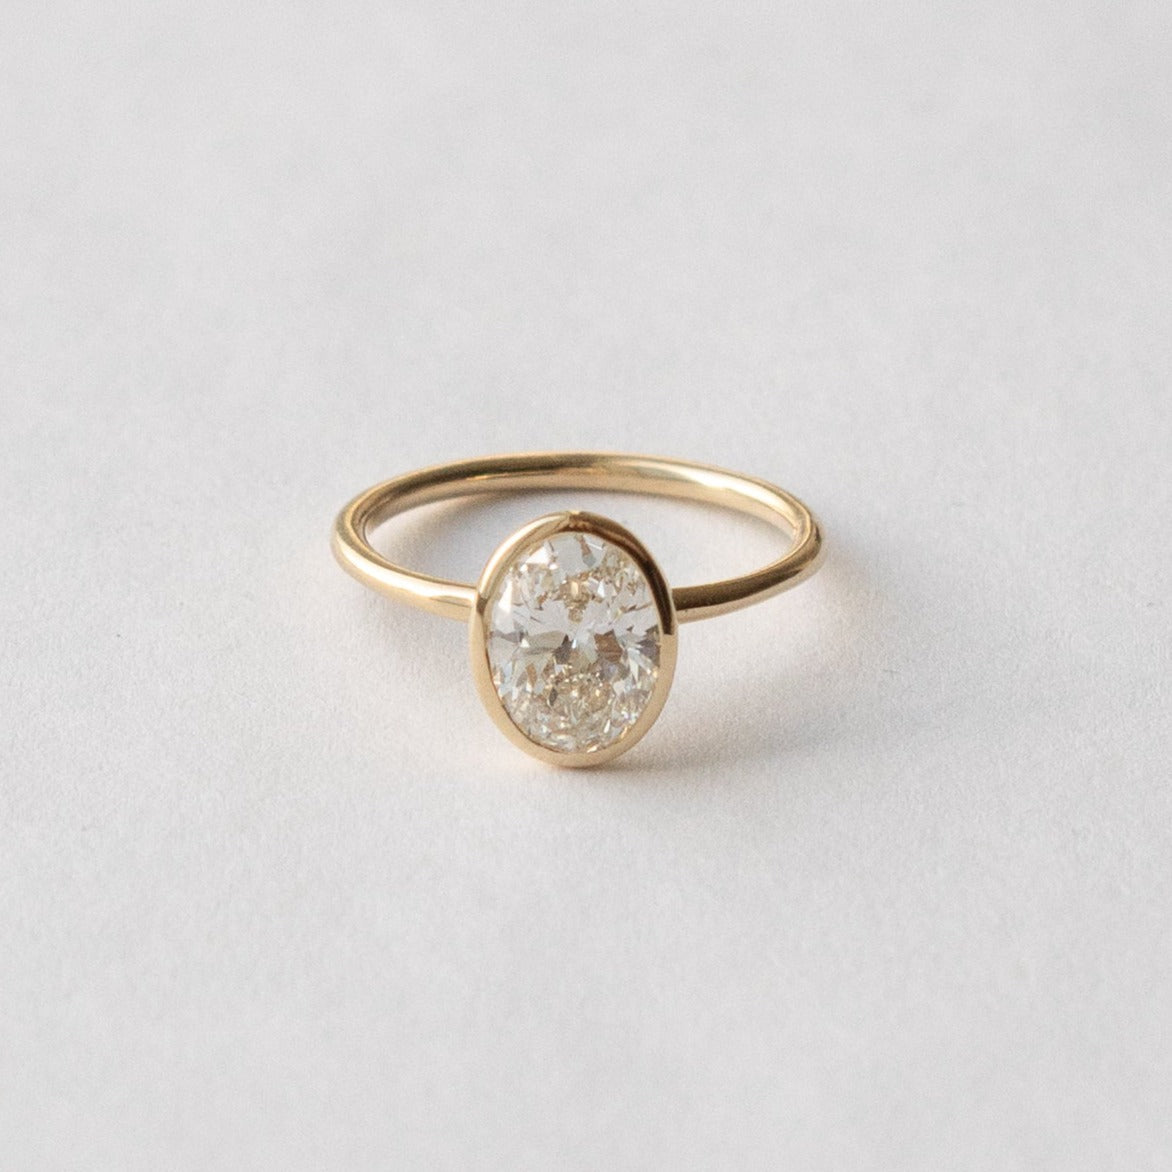 Artu Handmade Ring in 14k Gold set with 1.51ct oval cut lab-grown diamond By SHW Fine Jewelry NYC